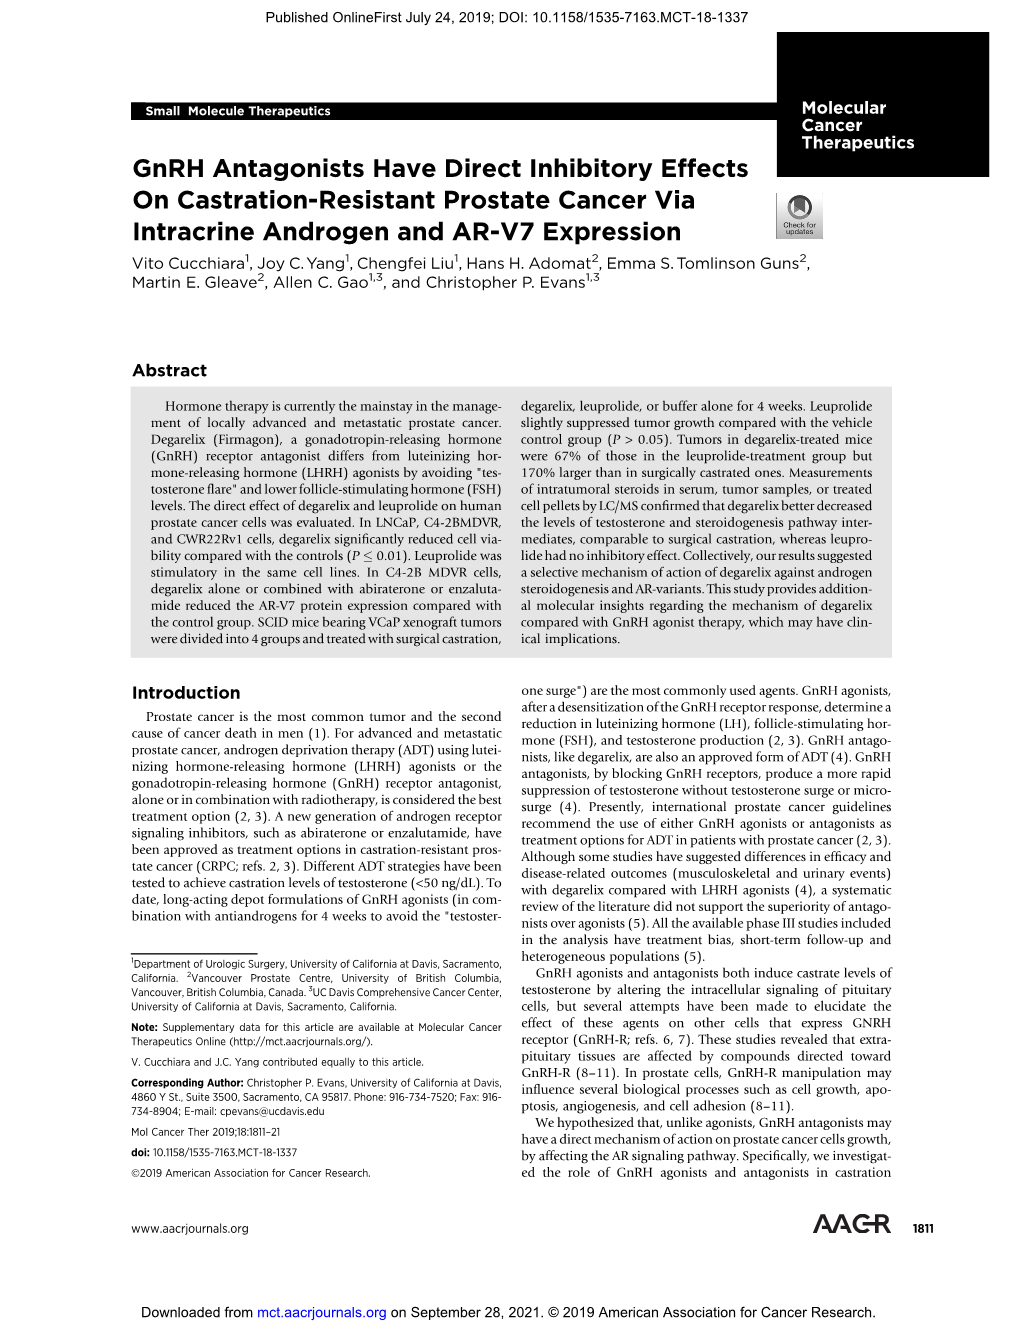 Gnrh Antagonists Have Direct Inhibitory Effects on Castration-Resistant Prostate Cancer Via Intracrine Androgen and AR-V7 Expression Vito Cucchiara1, Joy C